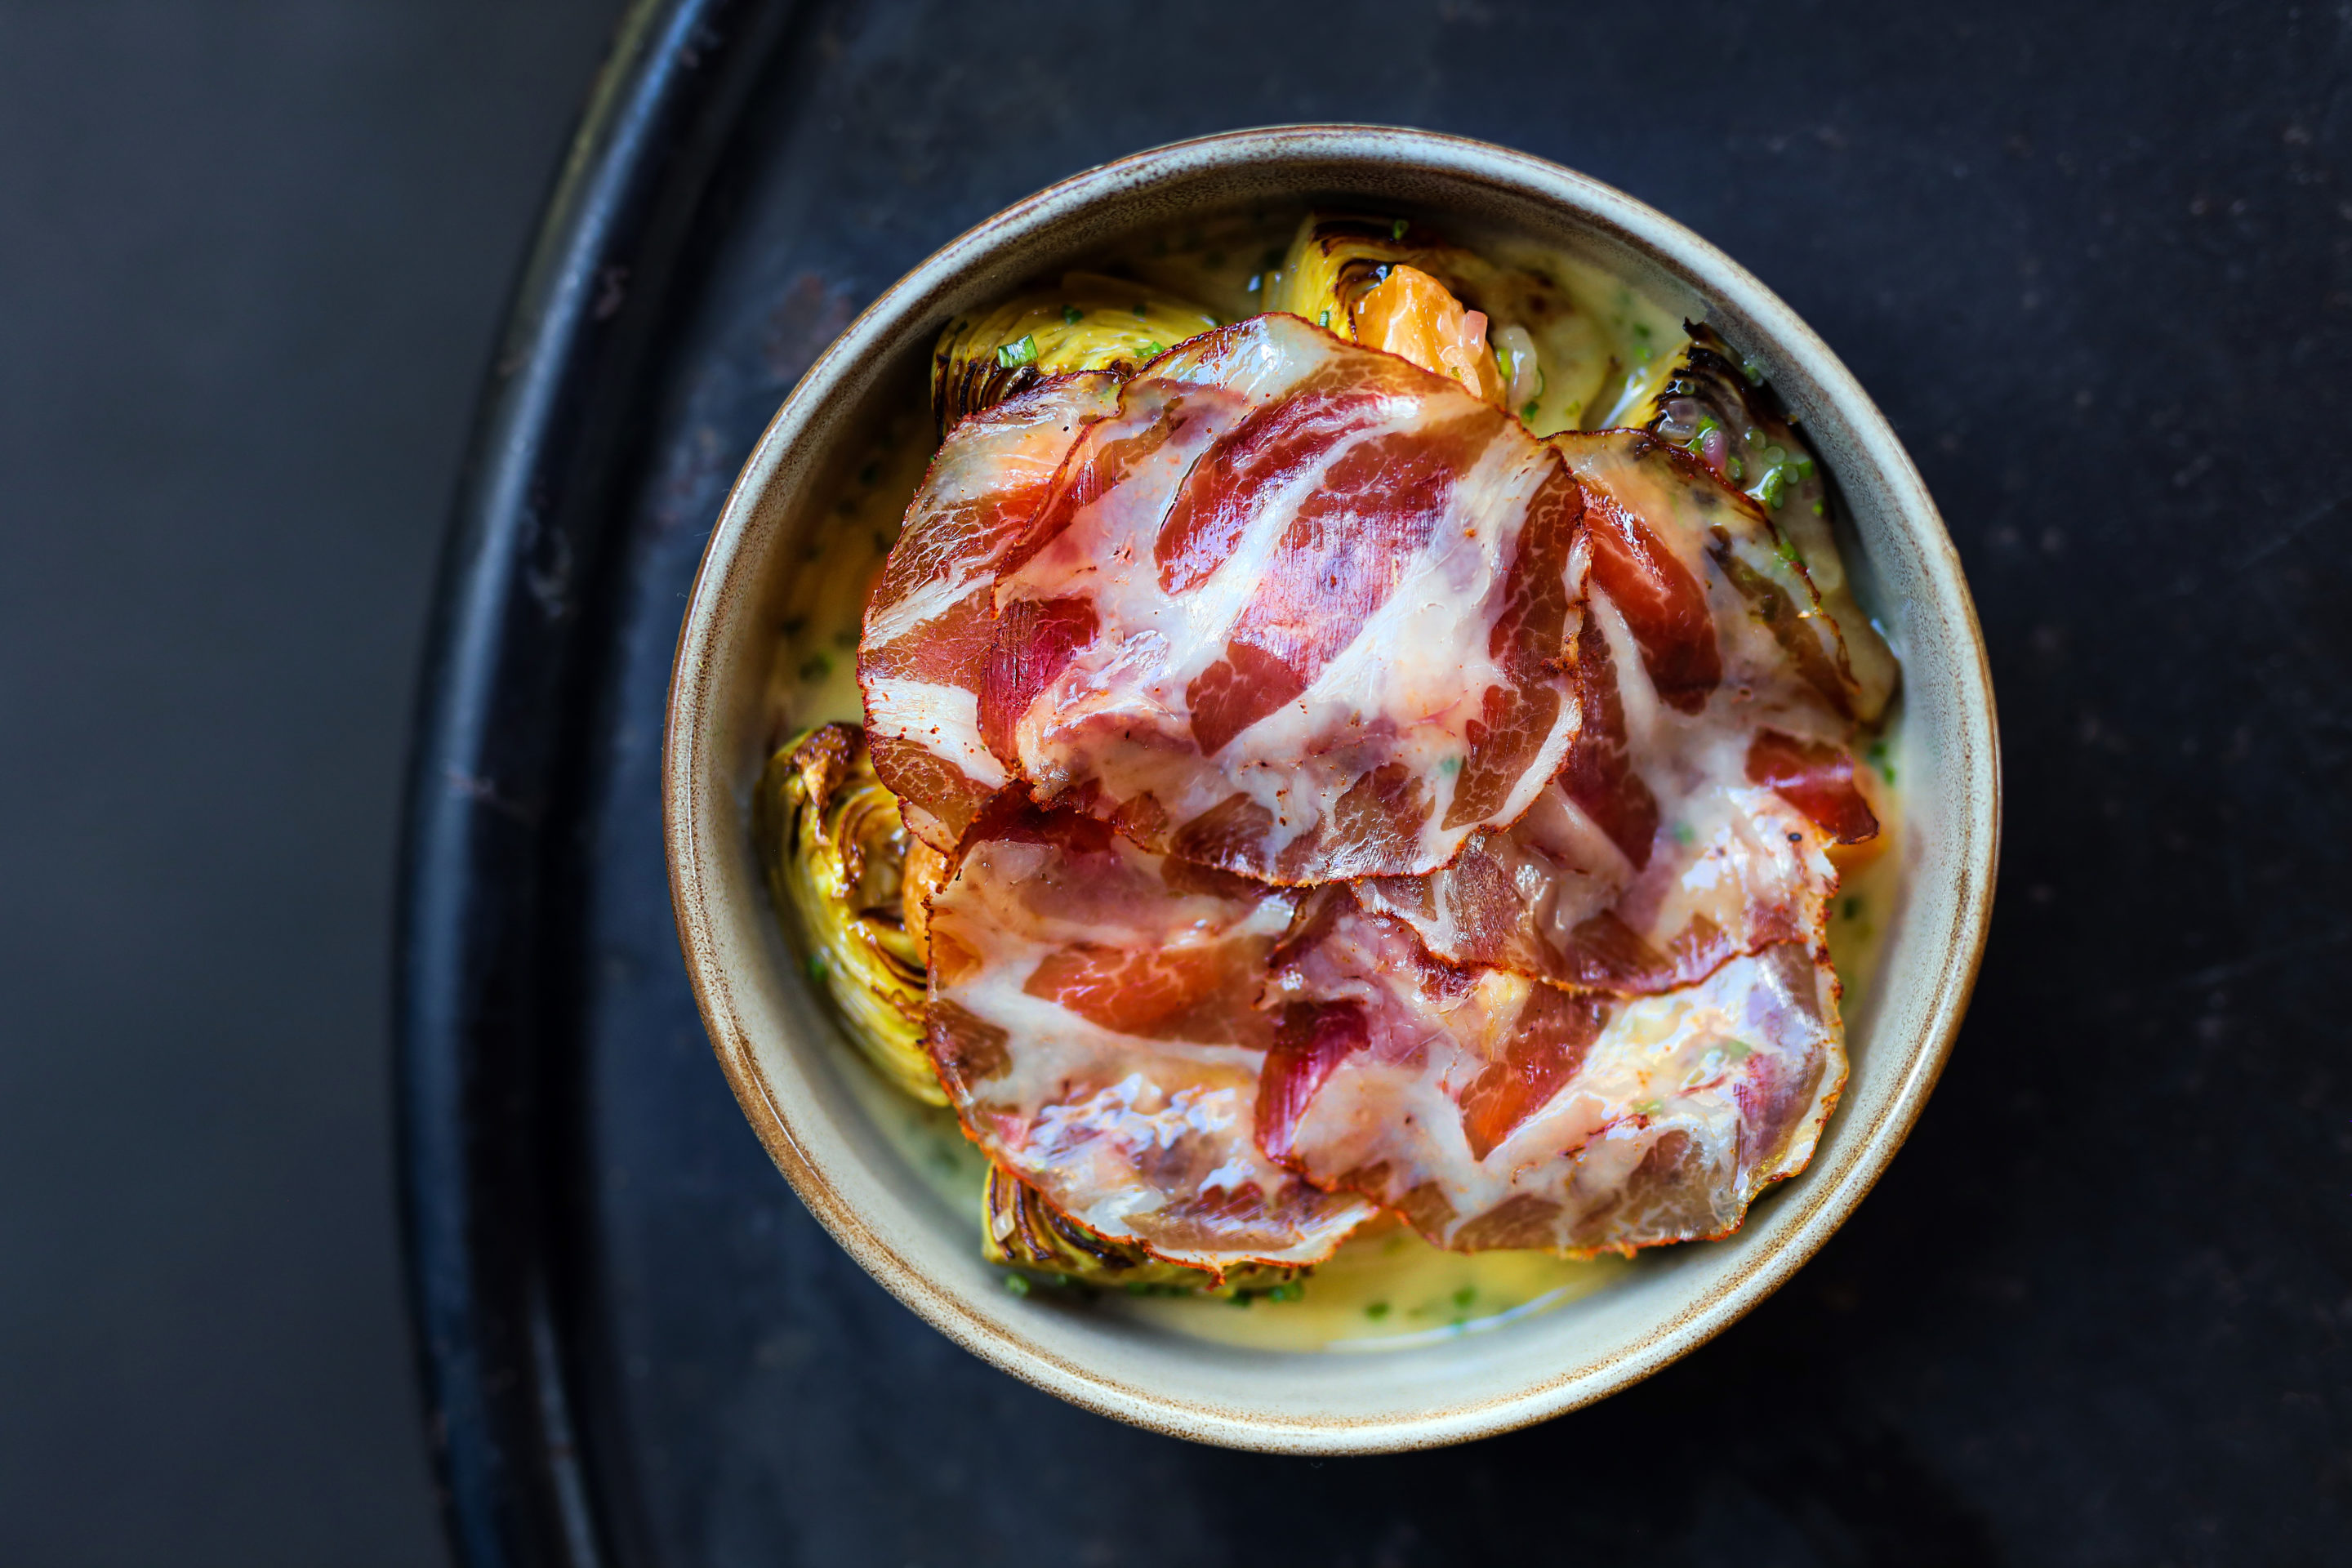 Bowl of brussel sprouts covered with prosciutto in a sauce